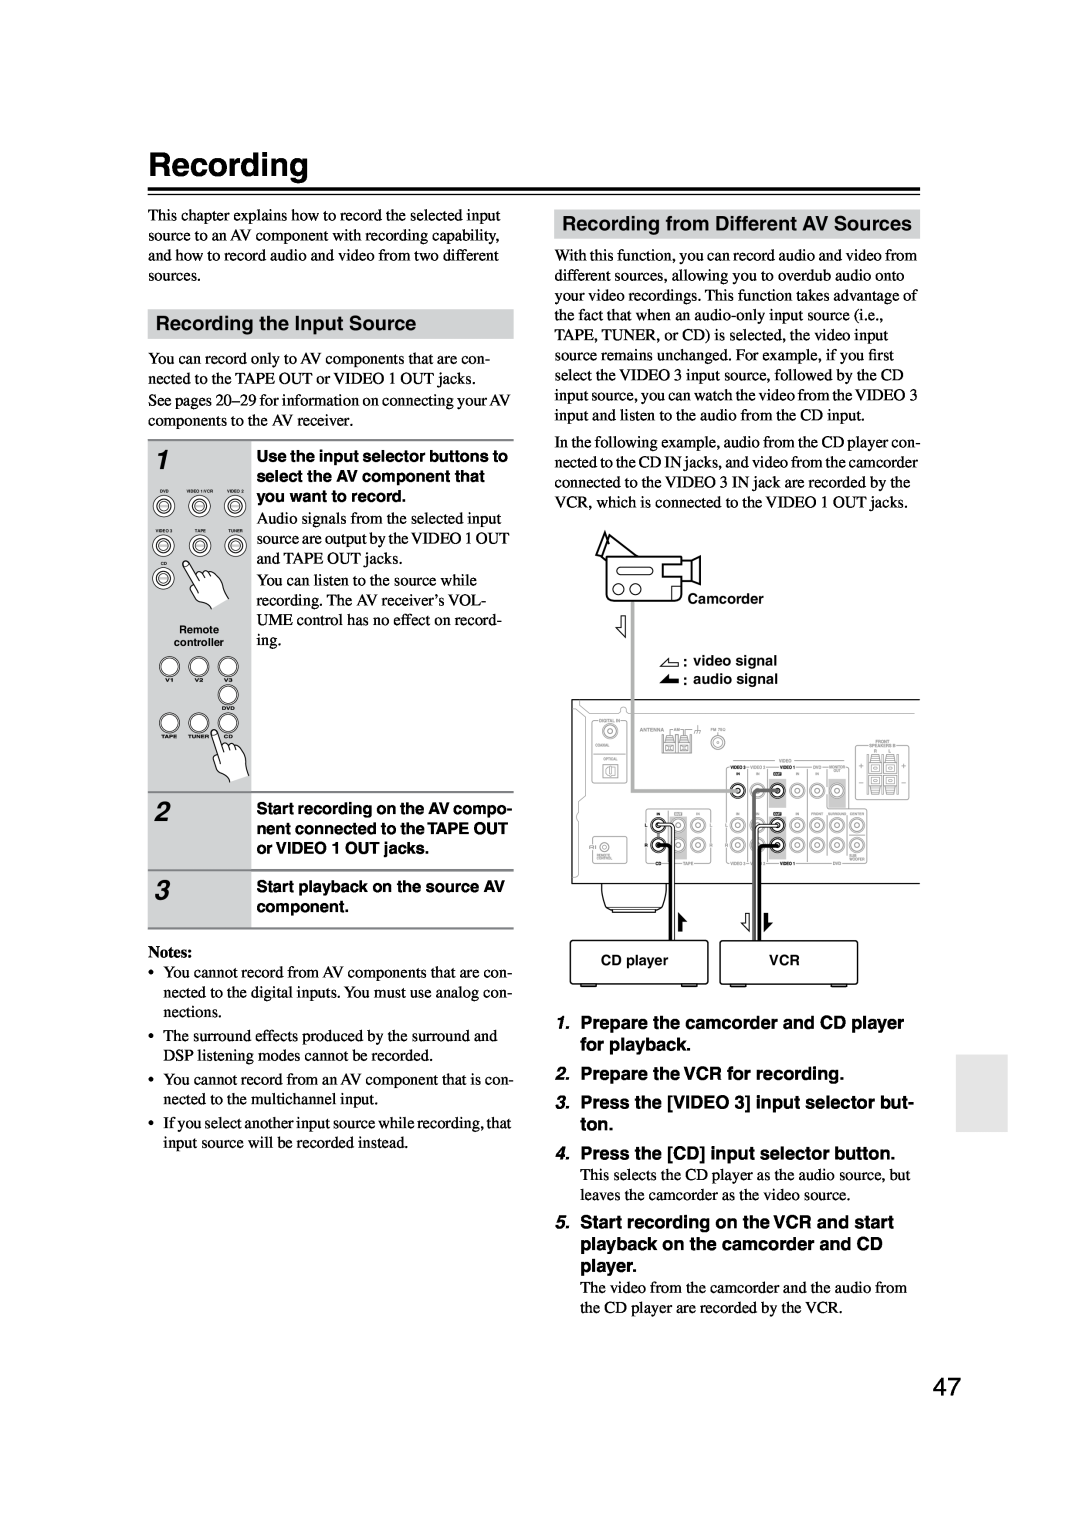 Onkyo TX-SR303E instruction manual Recording the Input Source, Recording from Different AV Sources 